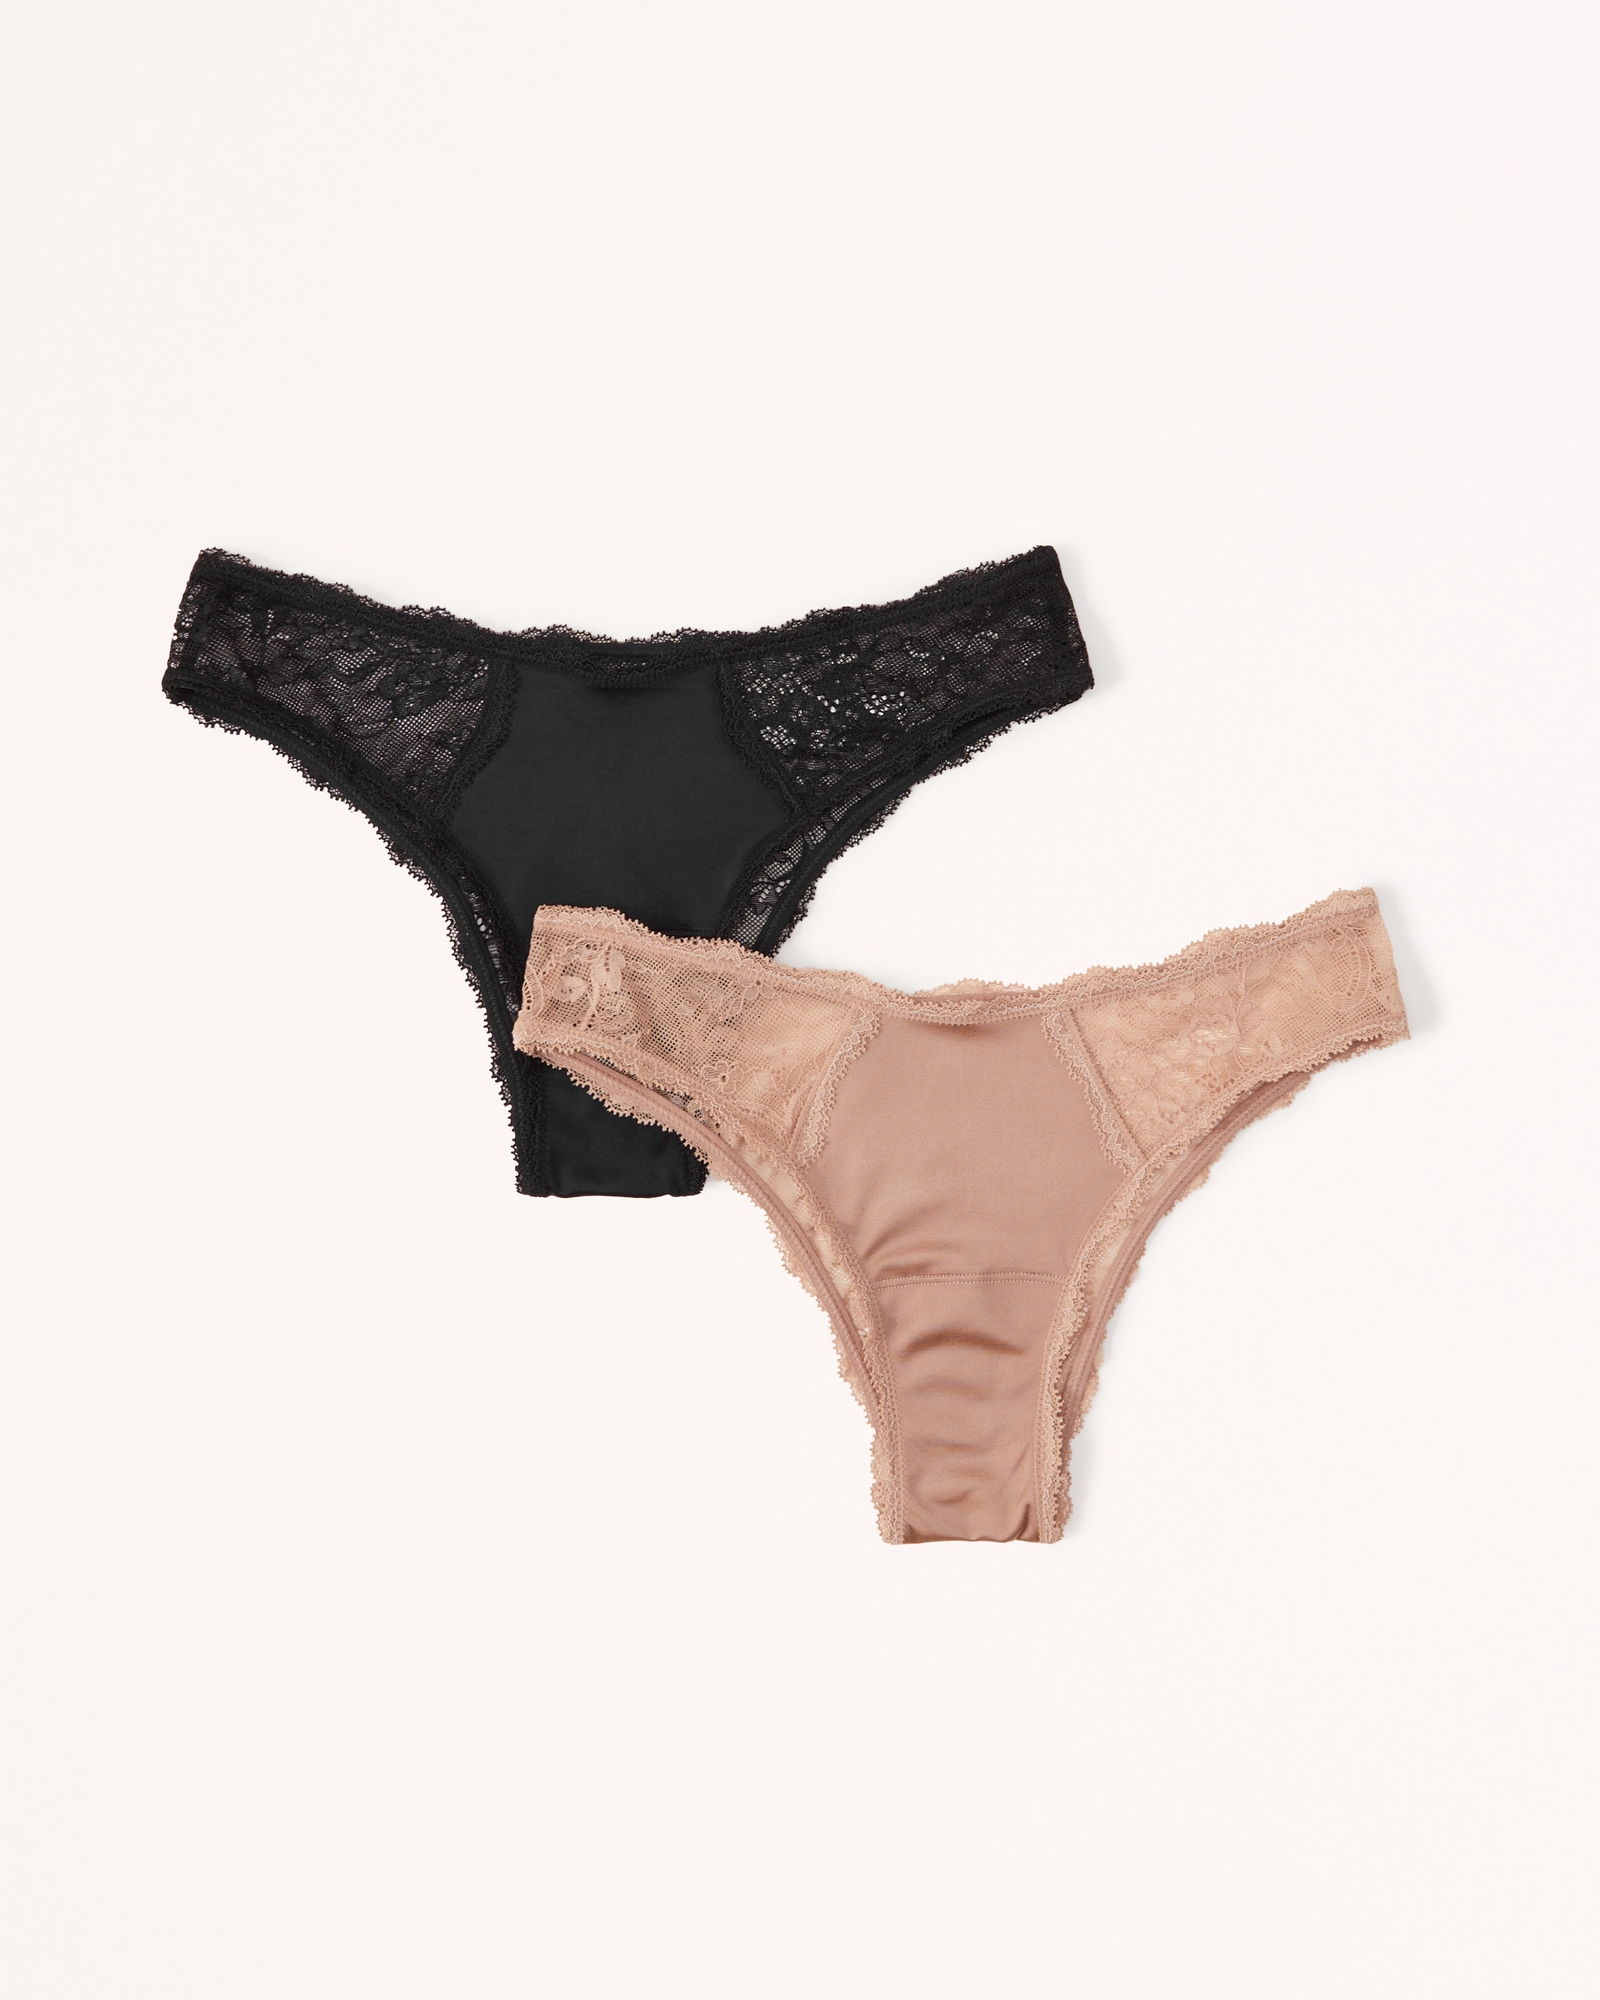 Women's 2-Pack Lace and Satin Undies